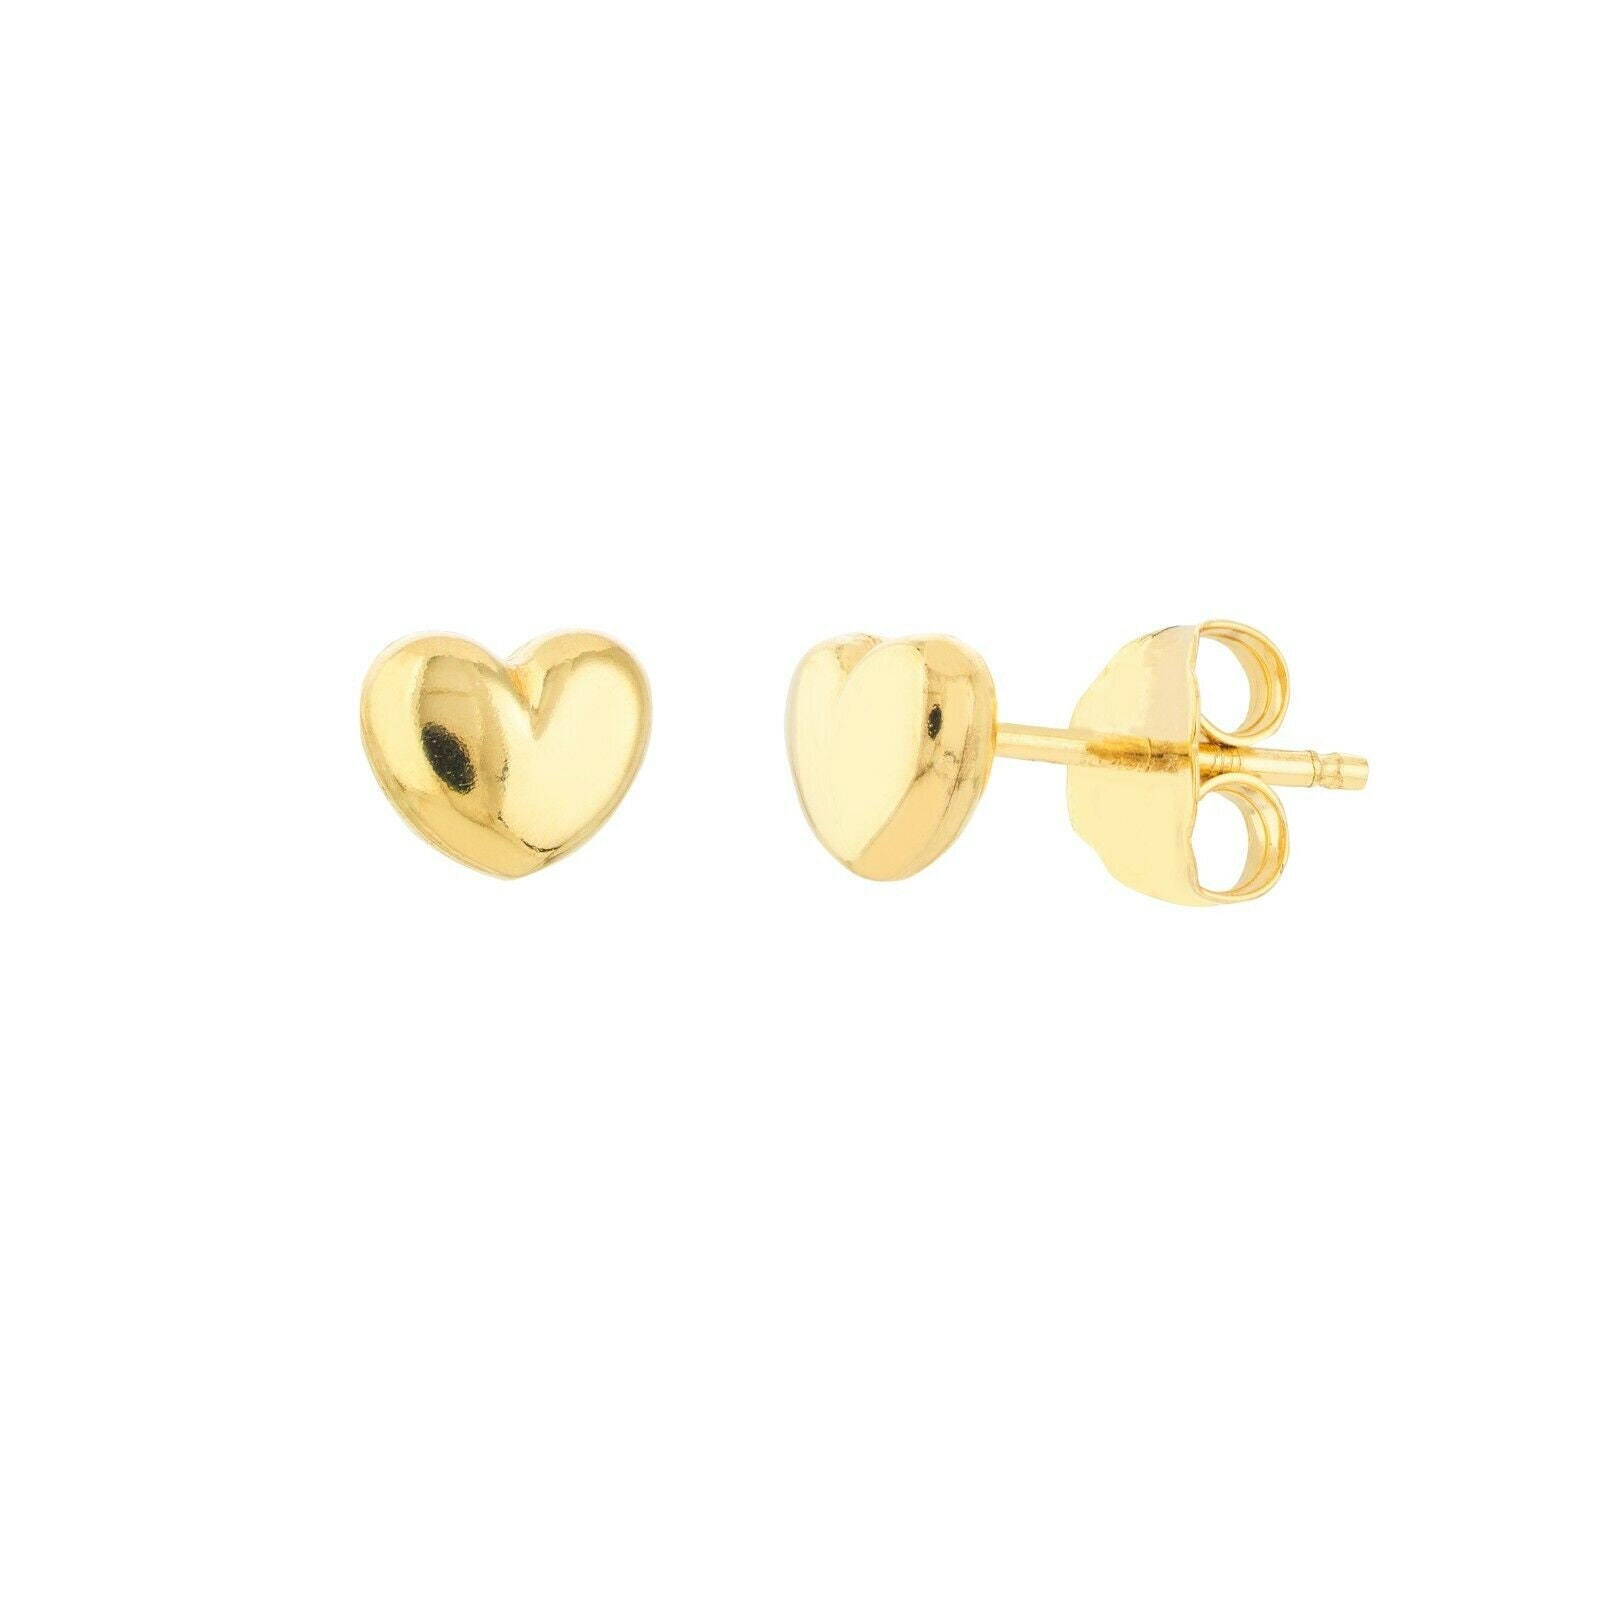 Puffed Heart Stud Ohrring Real 14K Gelbgold von BayamJewelry